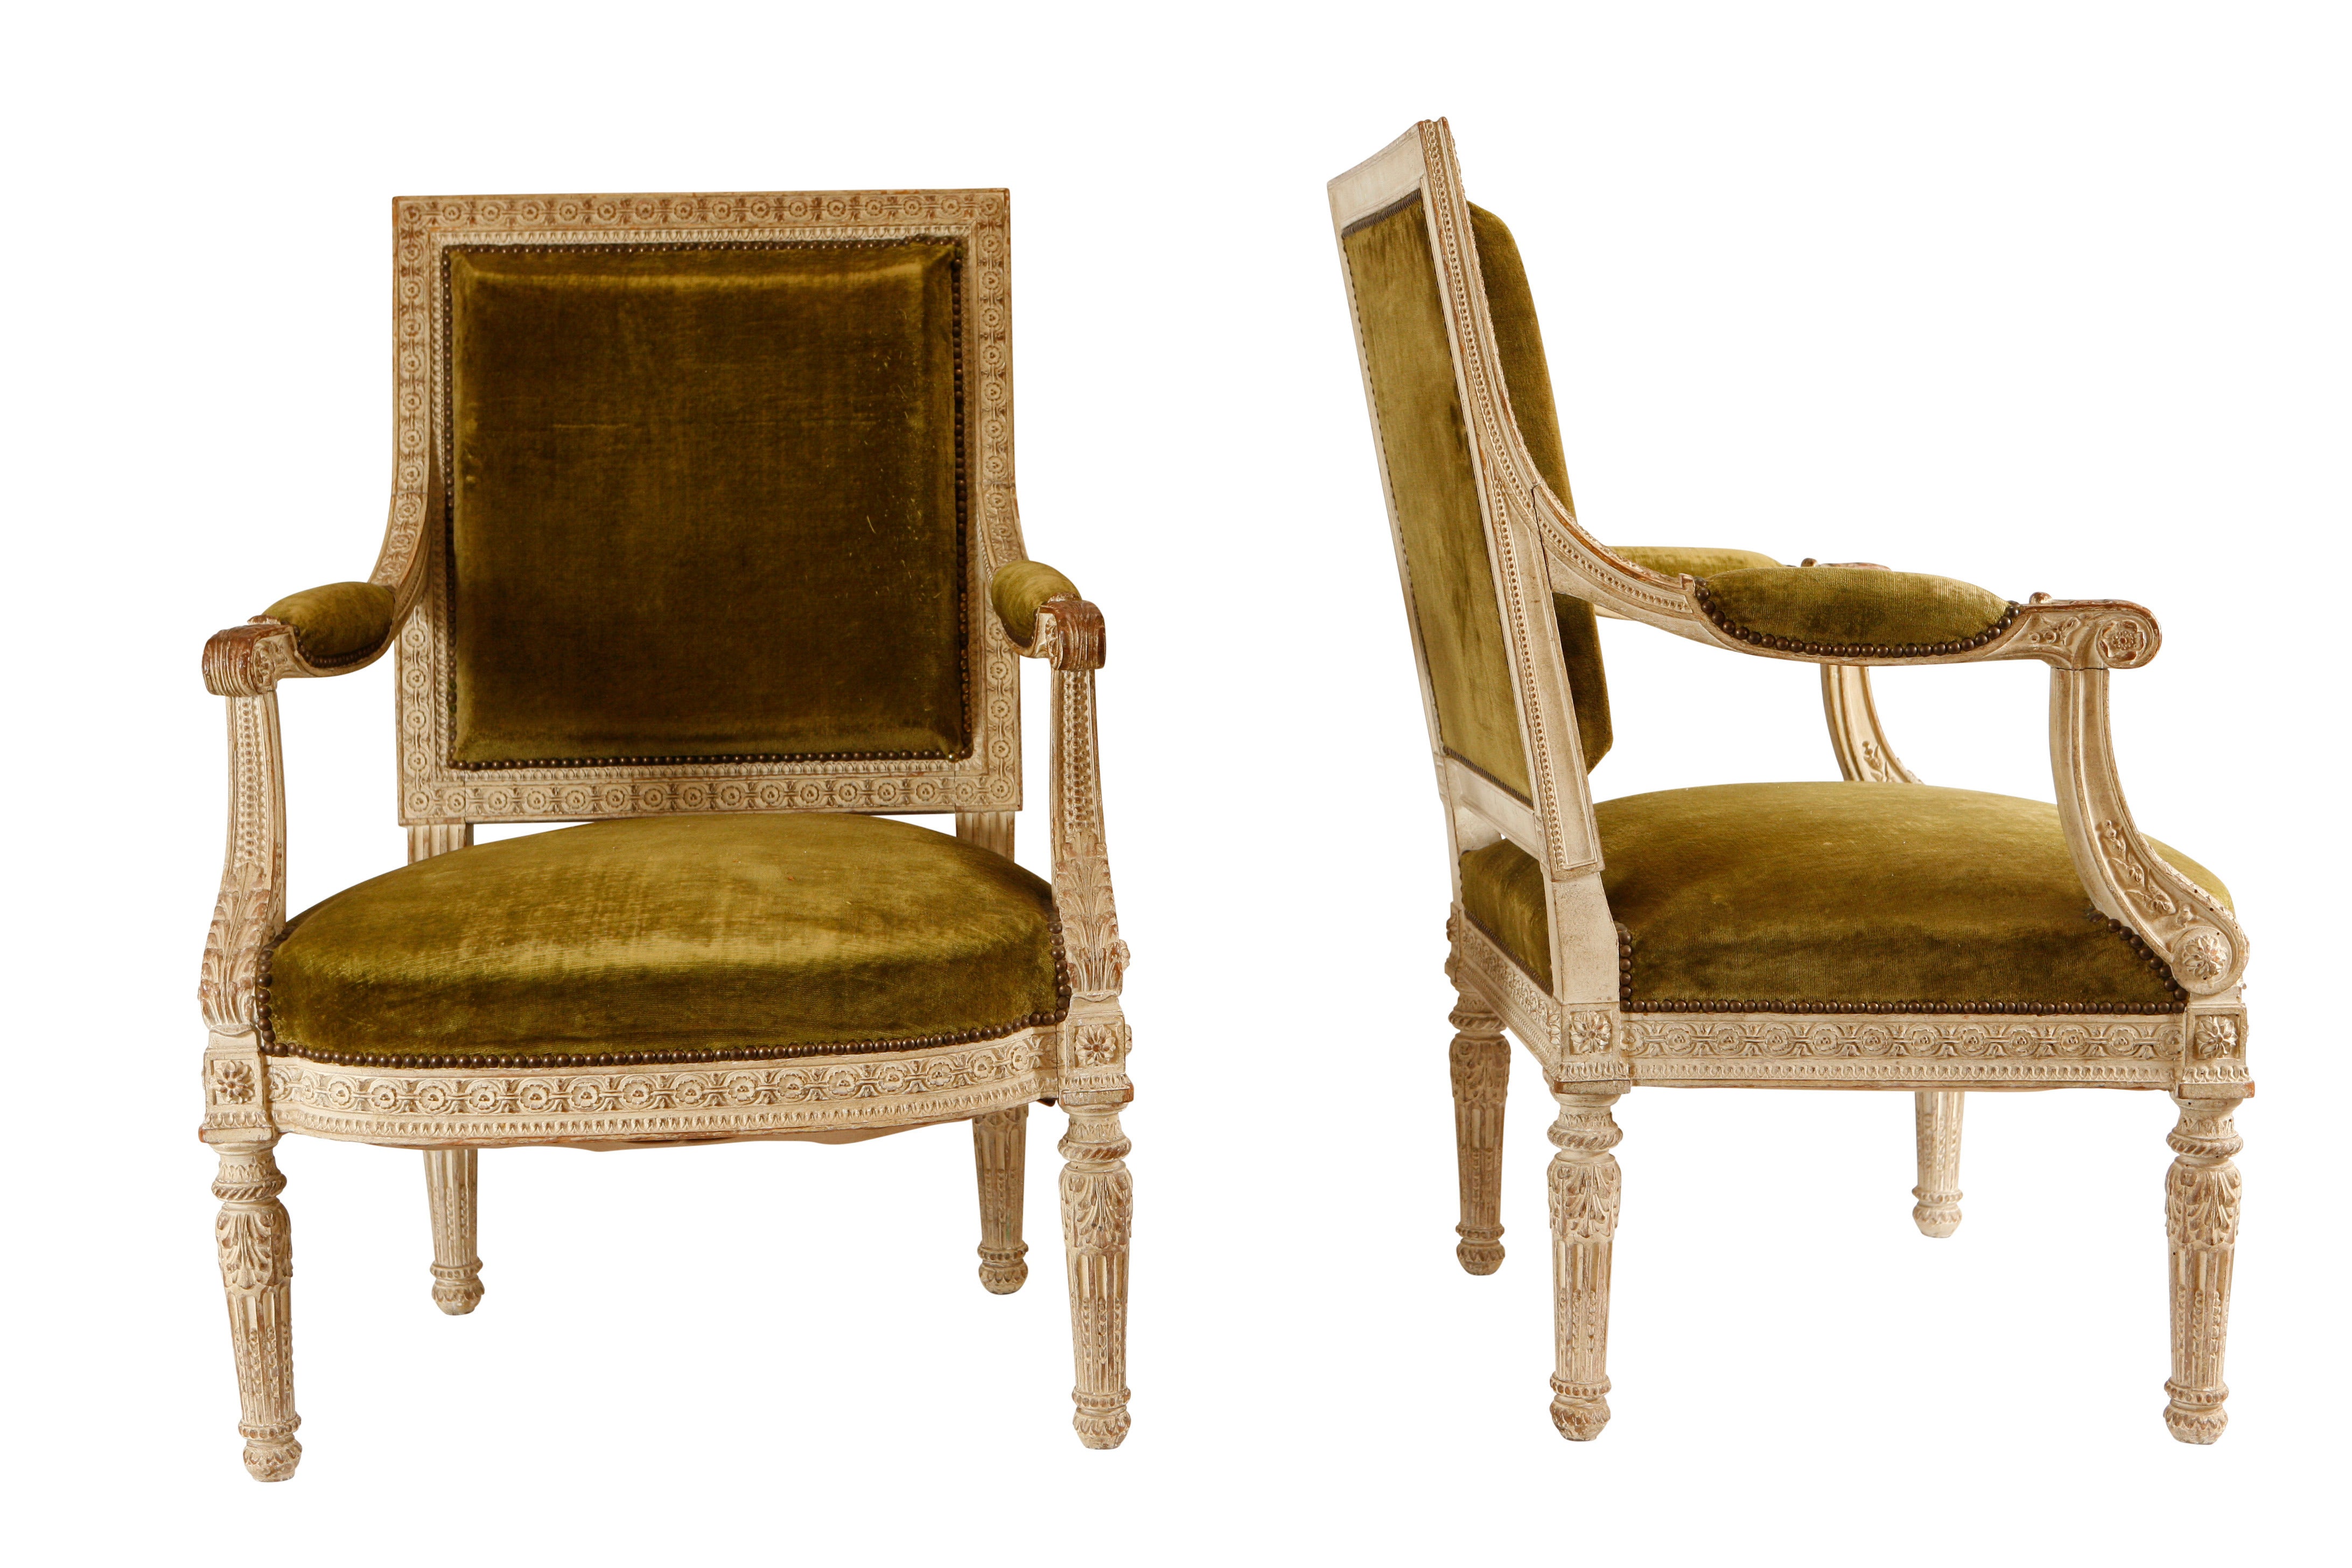 Louis XV Style Fauteuils Modeled after Marie Antoinette Furniture